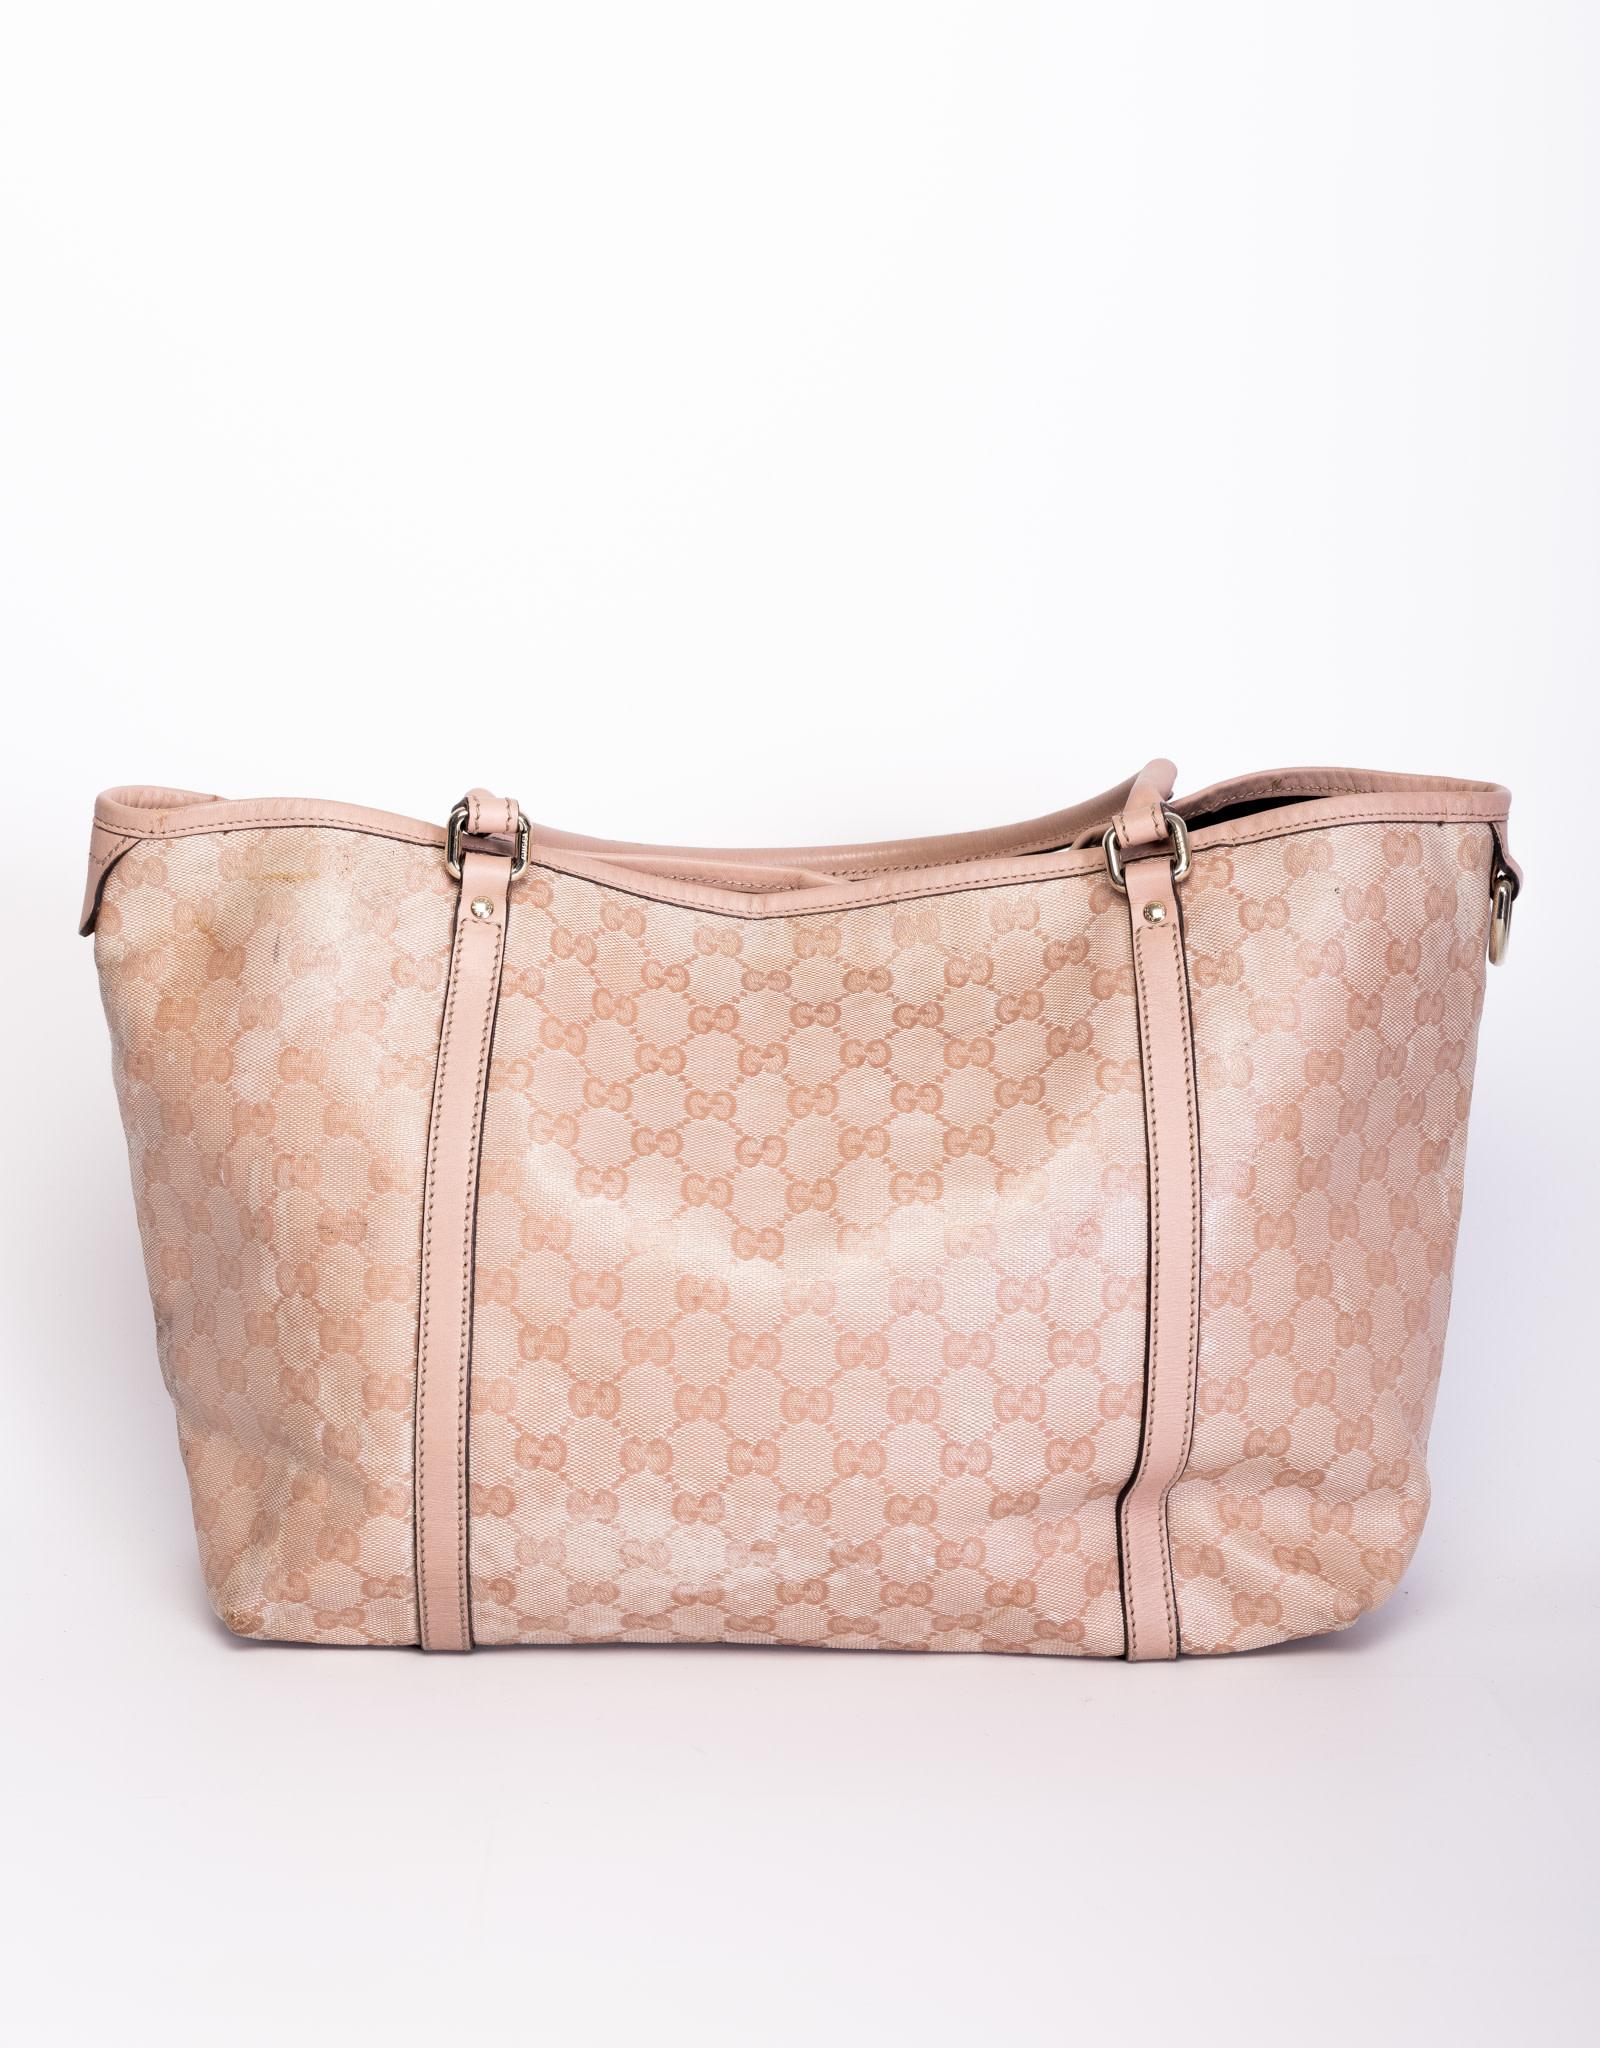 This Gucci tote bag is made out of coded canvas with the Gucci web GG monogram.  Featuring leather finishes, dual tall handles, an open top with brown woven interior lining.

COLOR: Pink
MATERIAL: Coated canvas with leather finishes 
ITEM CODE: